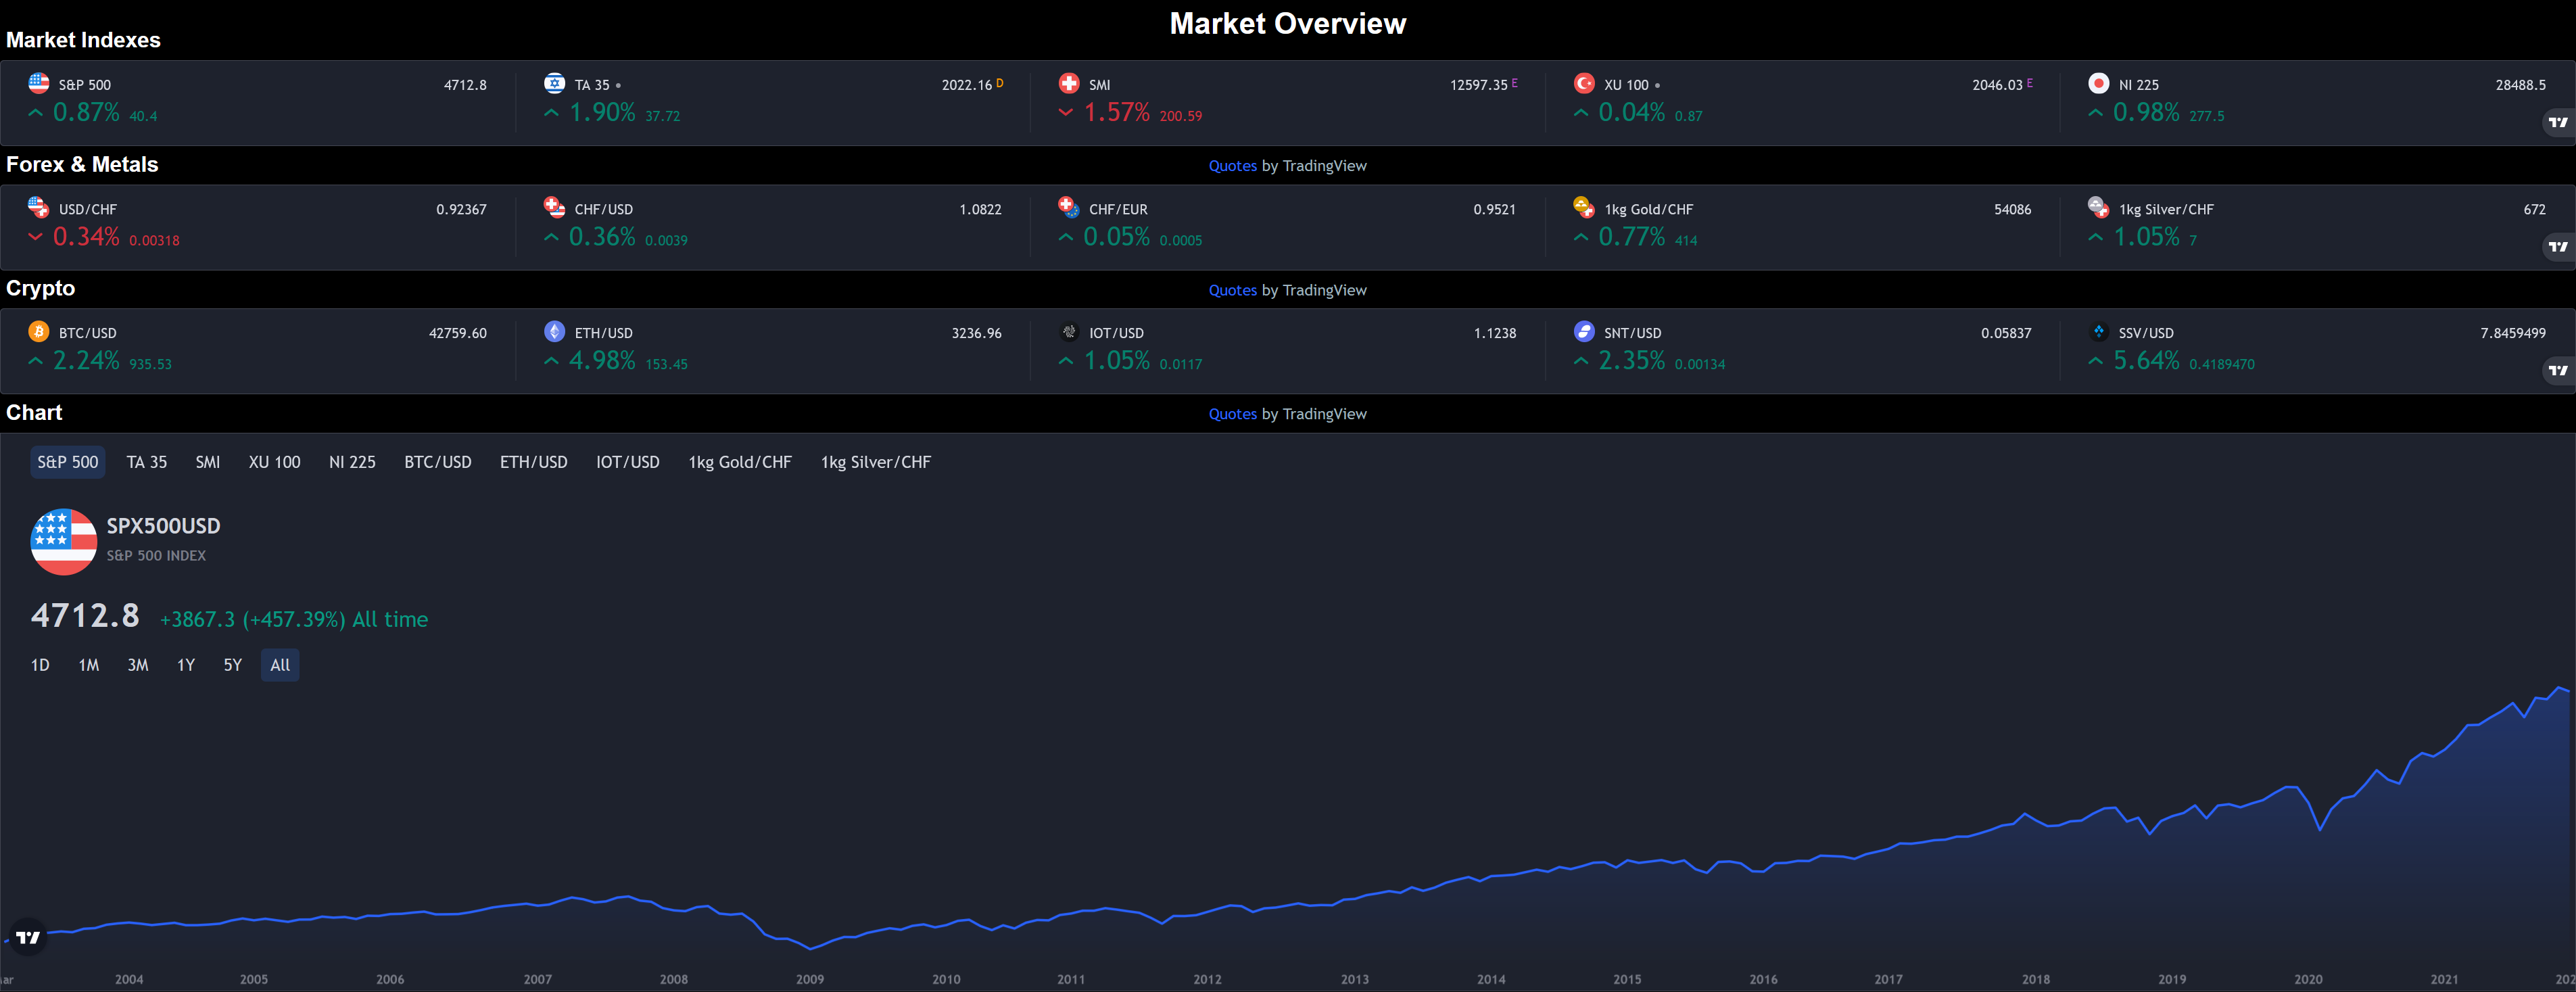 Market Overview Federal Funds Rate price movements Indexes Forex Metals and Crypto